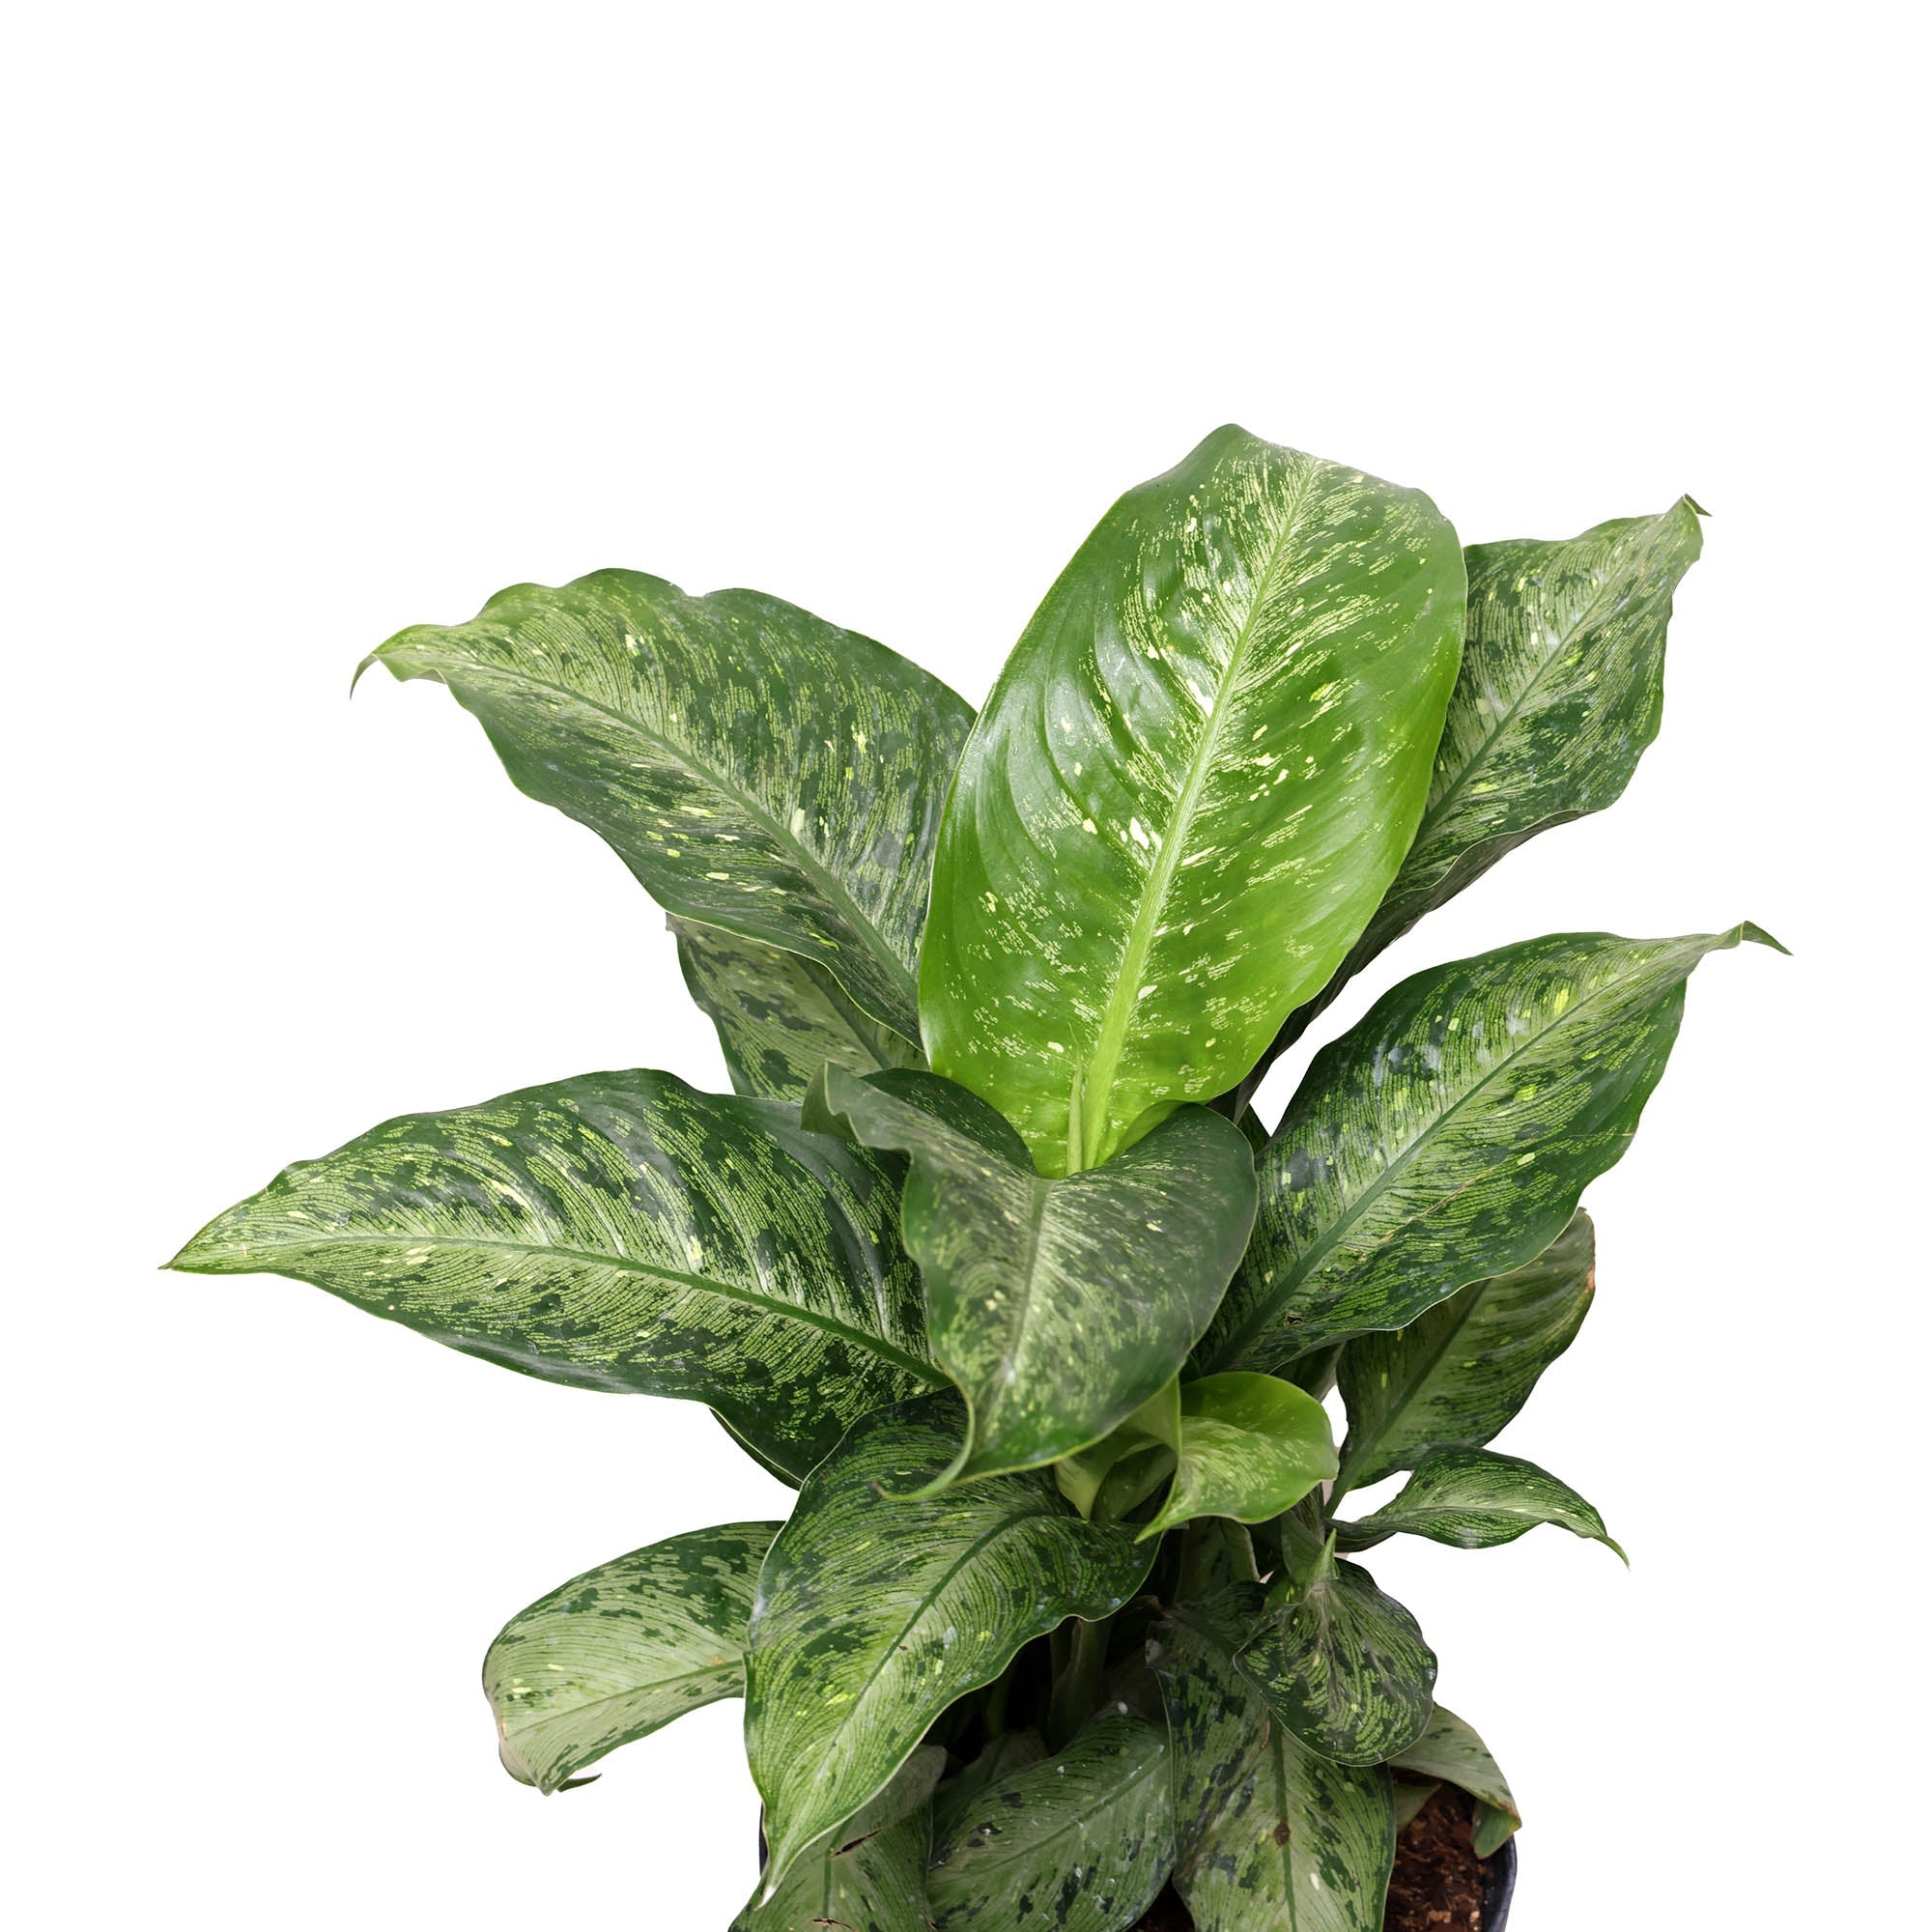 A Dieffenbachia Tropic Snow 10 Inches plant with broad, variegated green leaves in a black grower pot against a white background by Chive Studio.